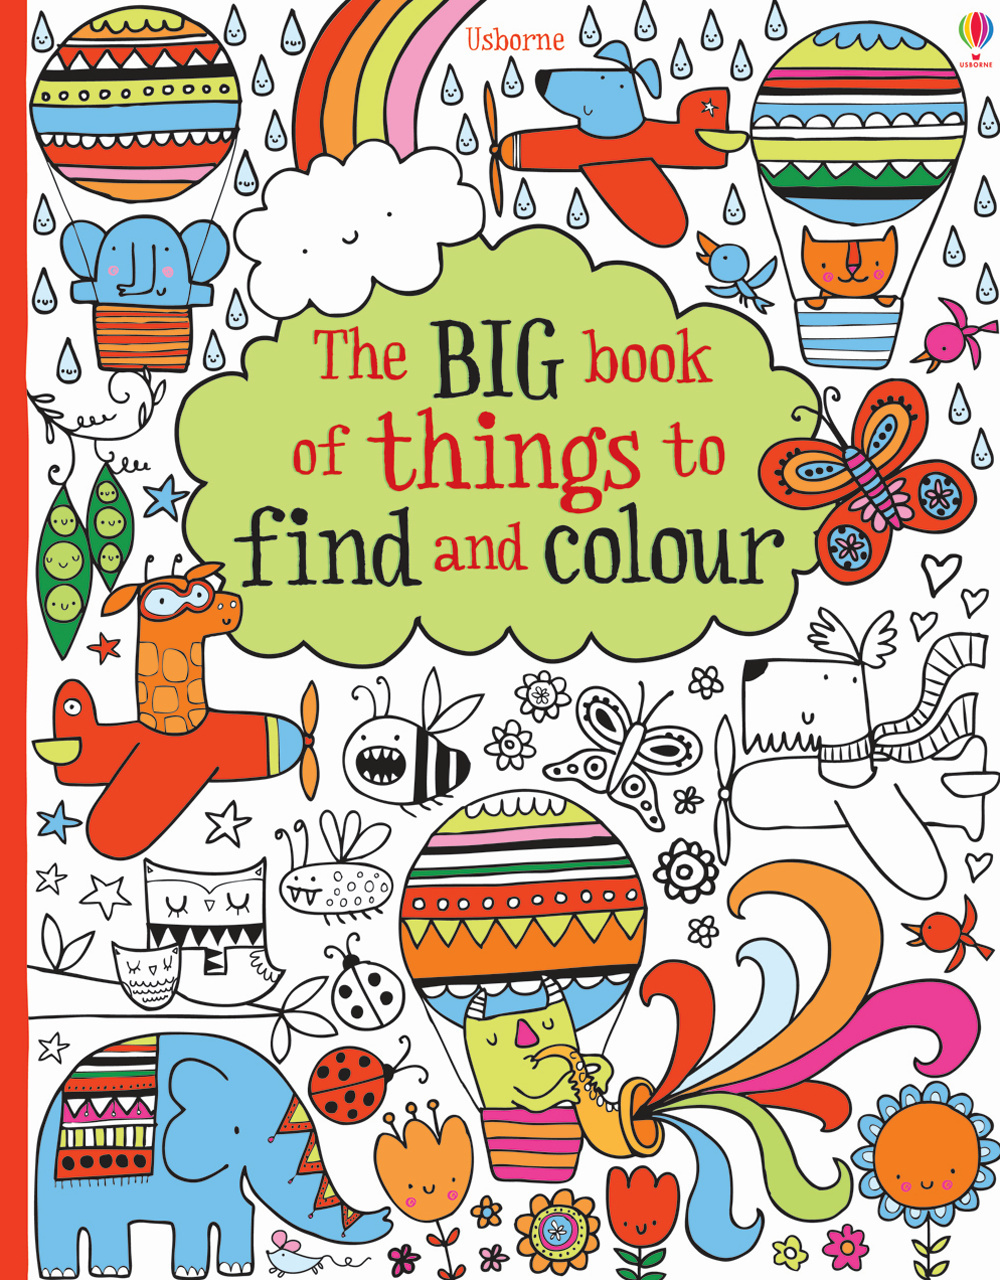 The big book of things to find and colour. Ediz. illustrata